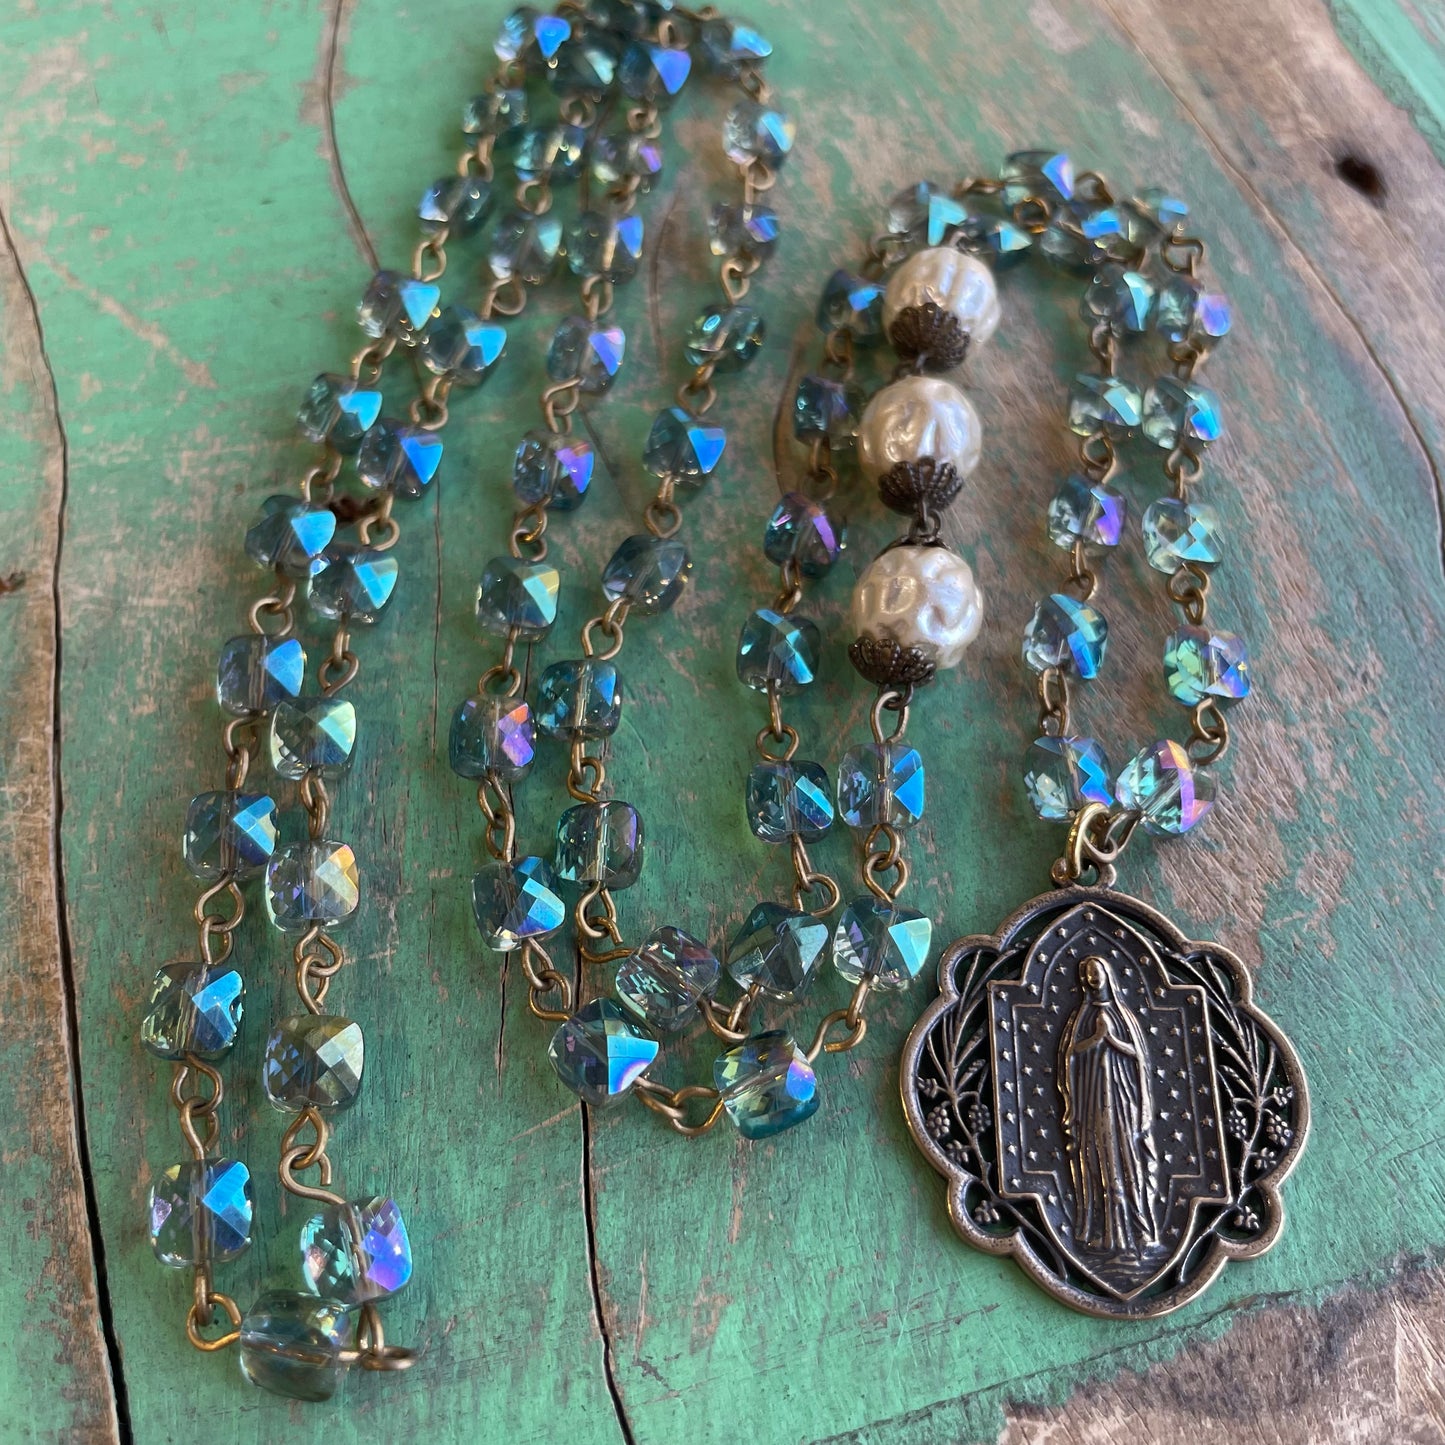 Our Lady Iridescent Necklace and Earrings